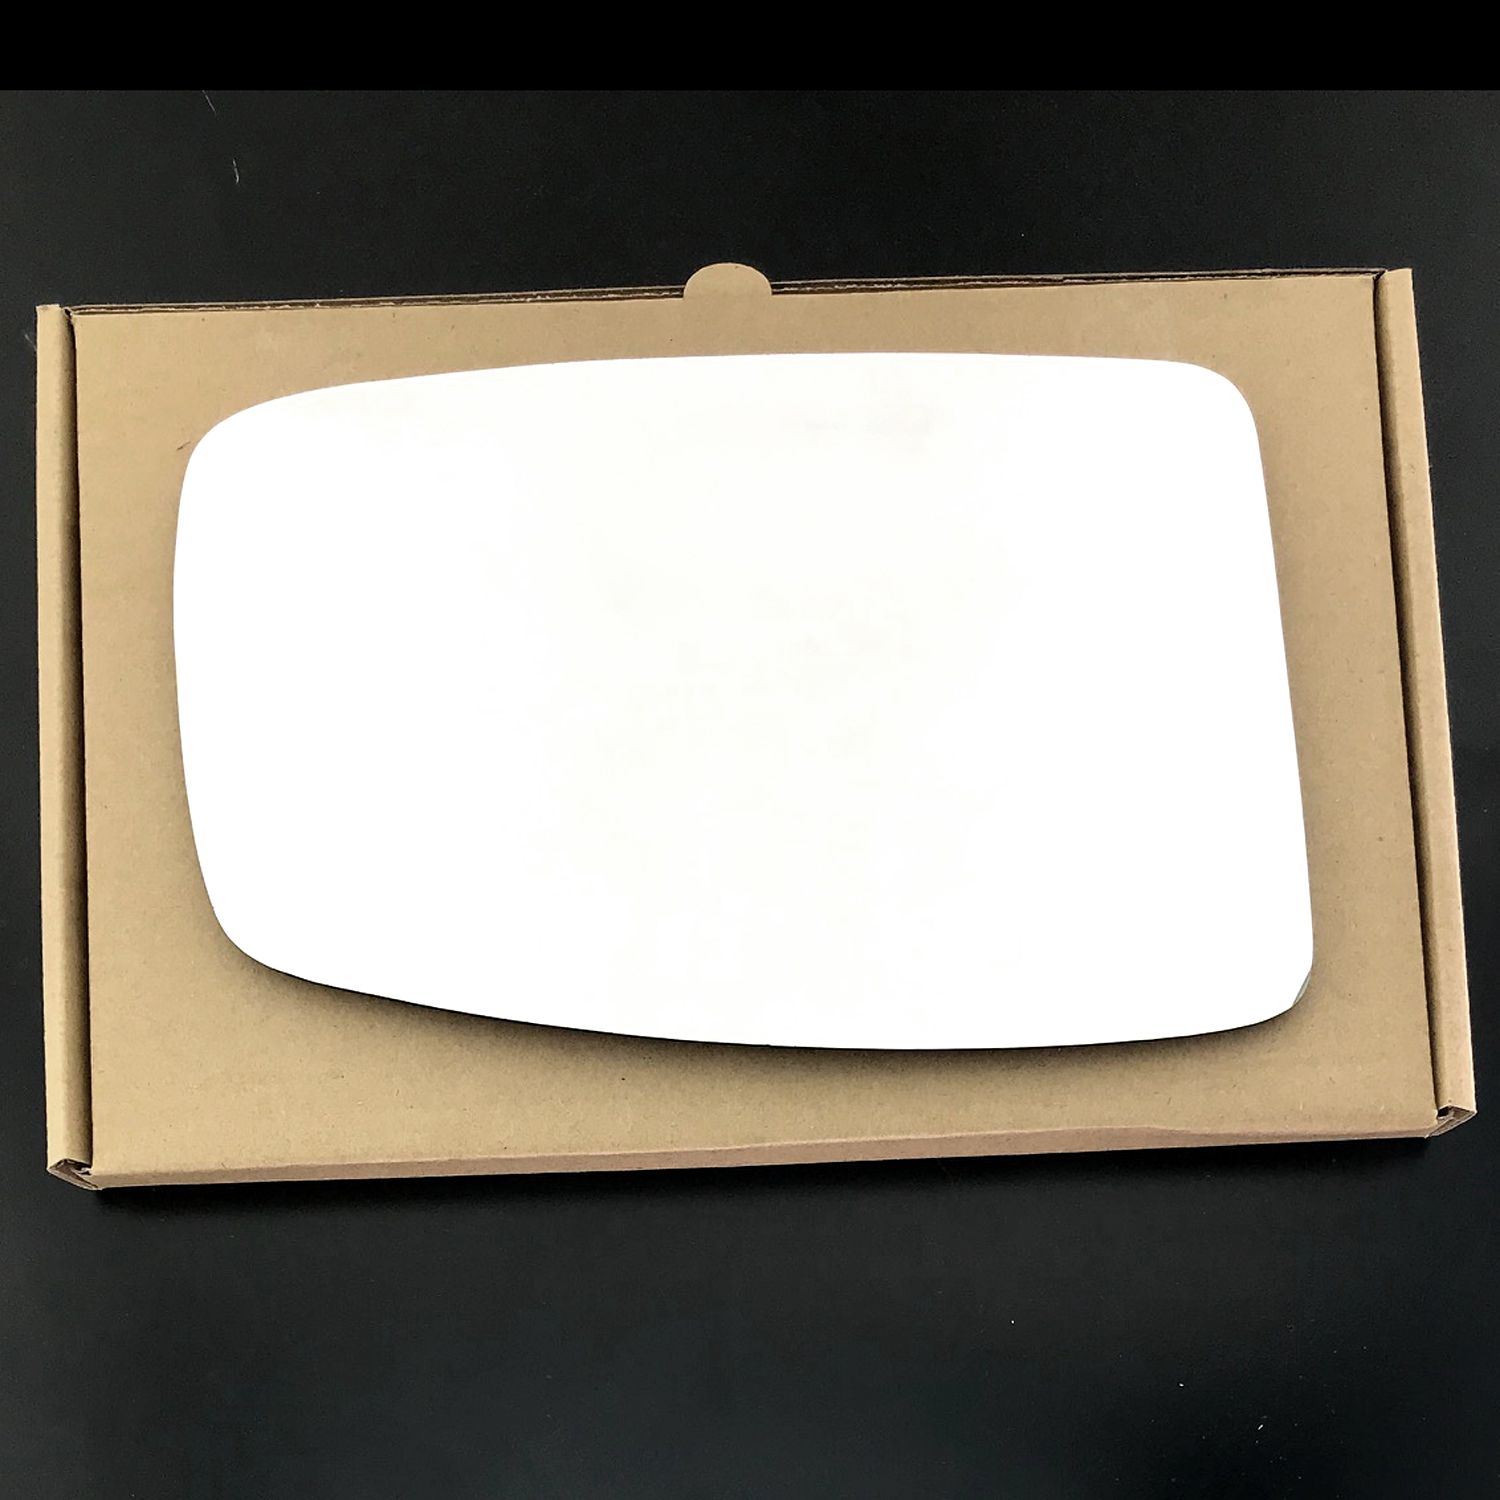 Vauxhall Movano Wing Mirror Glass LEFT HAND ( UK Passenger Side ) 2011 to 2020 – Convex Wing Mirror